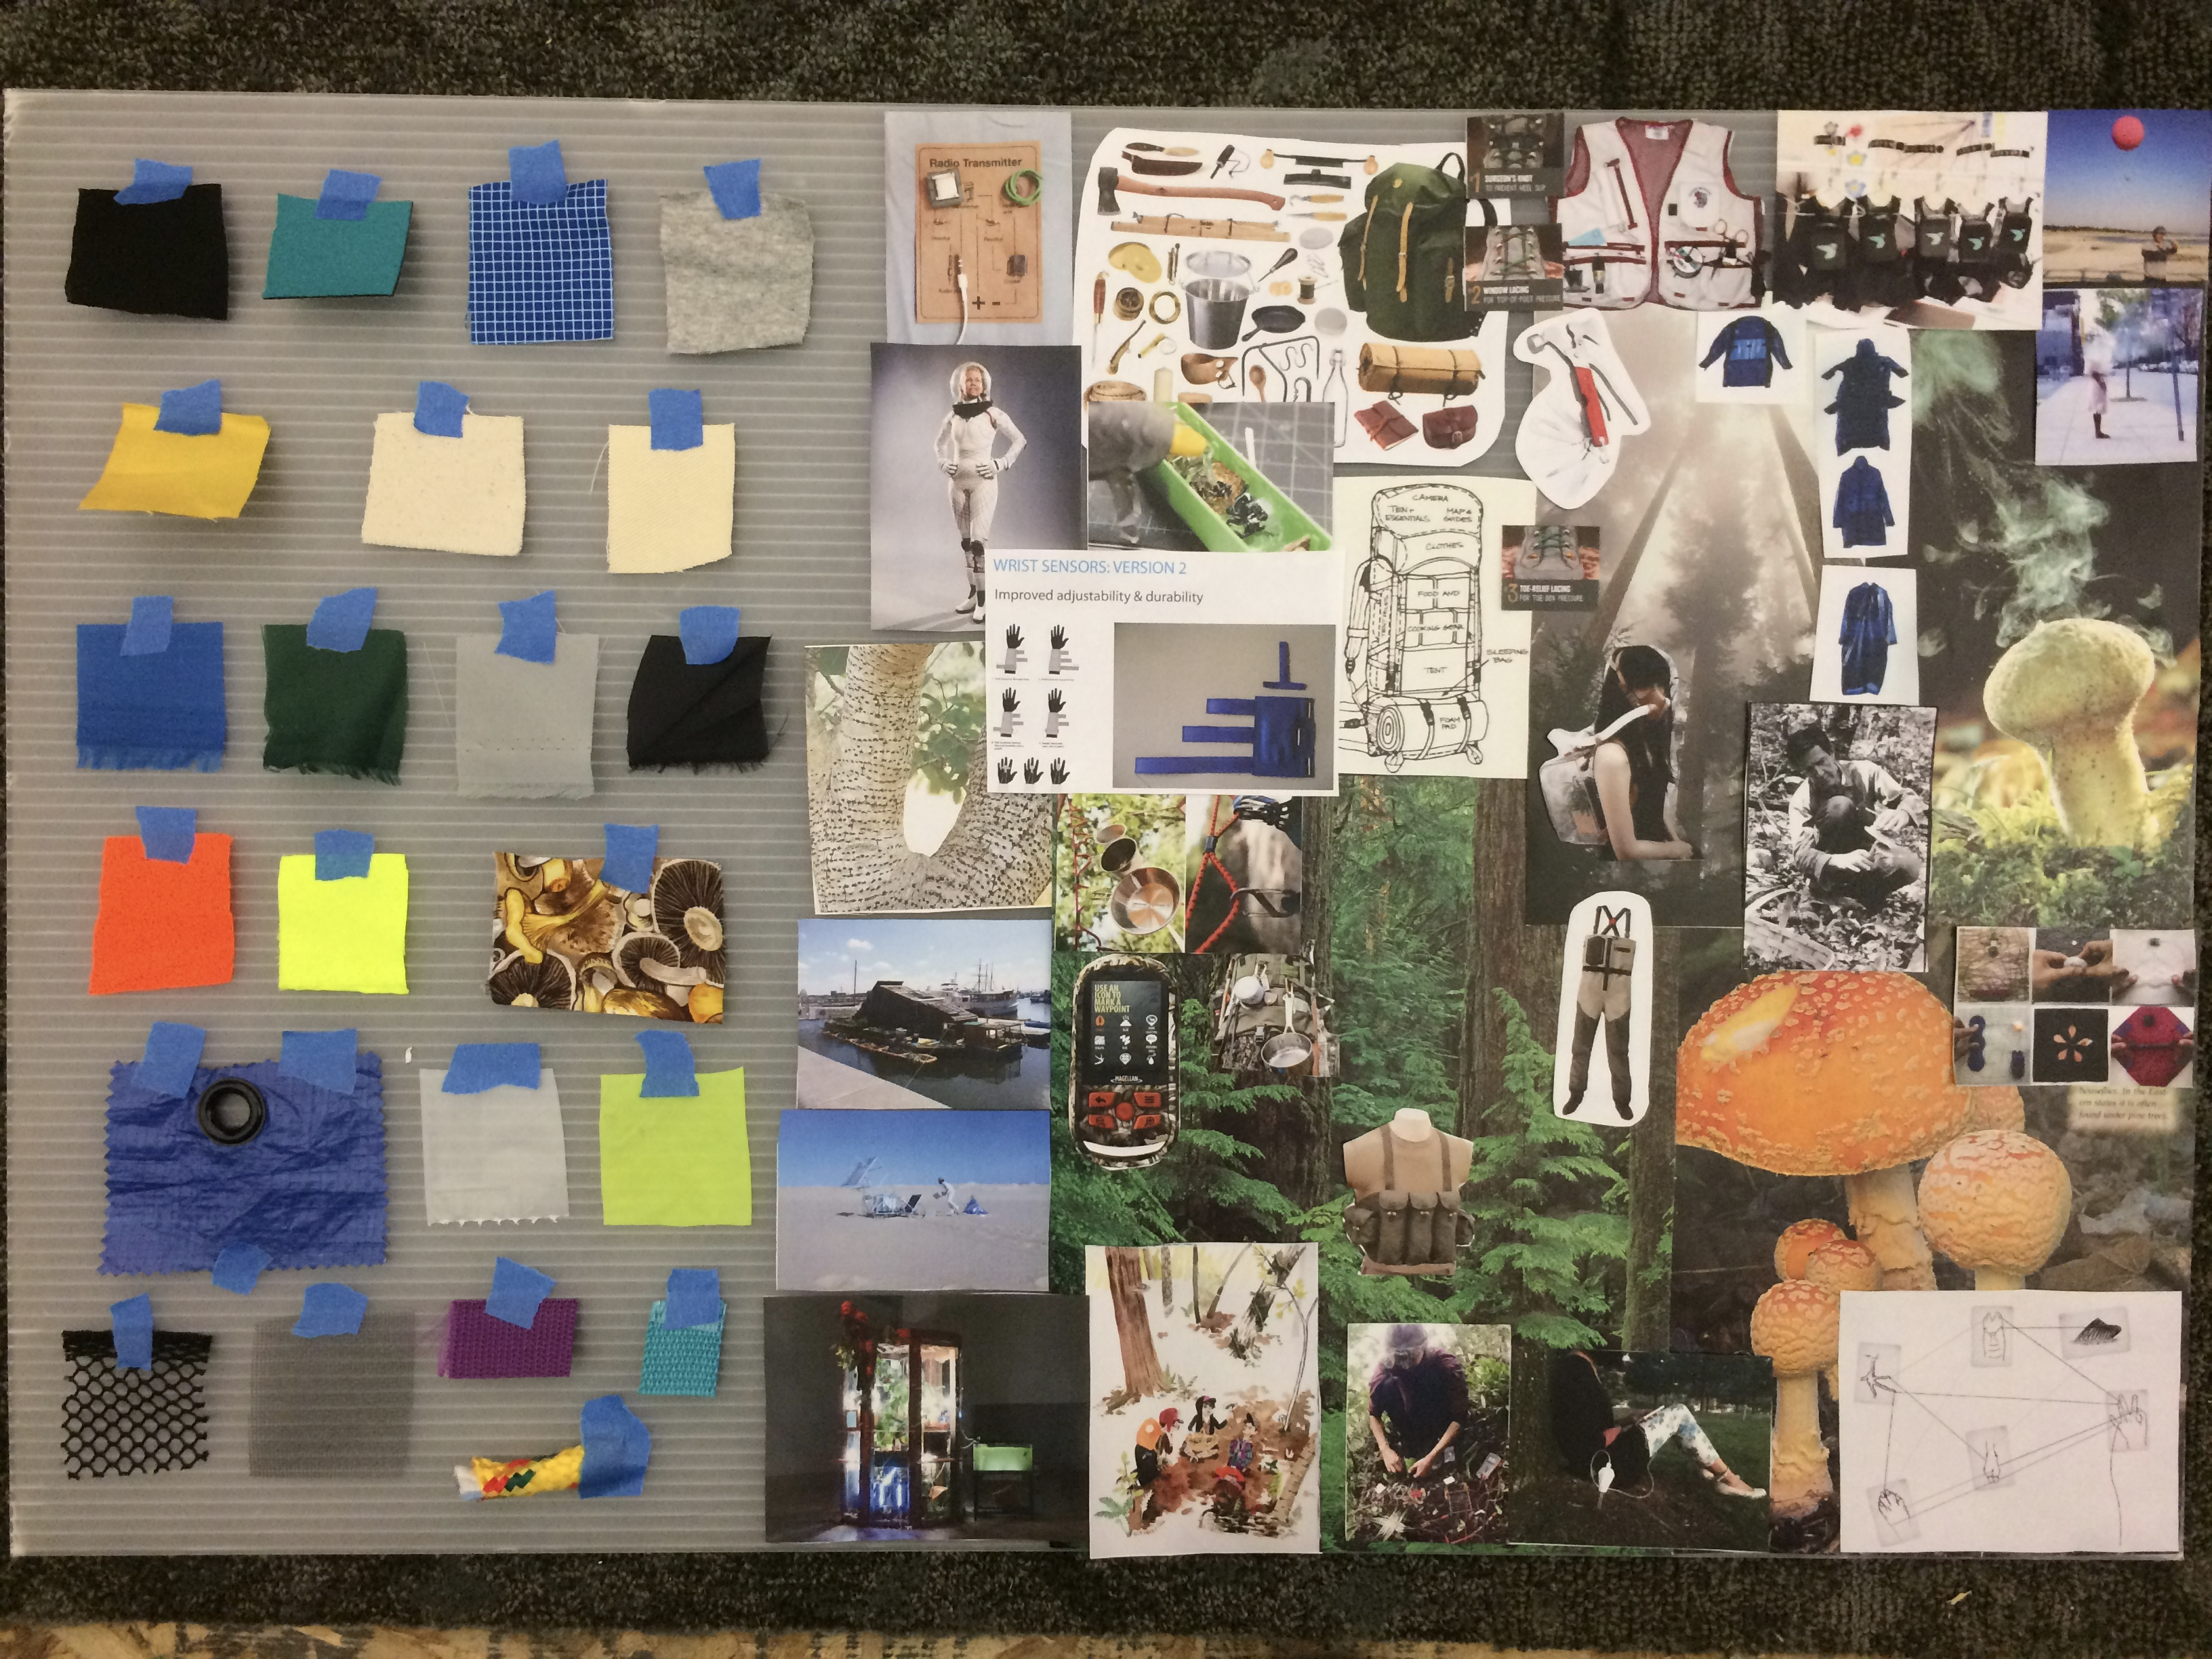 Physical mood board with photos of trees, insects, mushrooms, camping gear